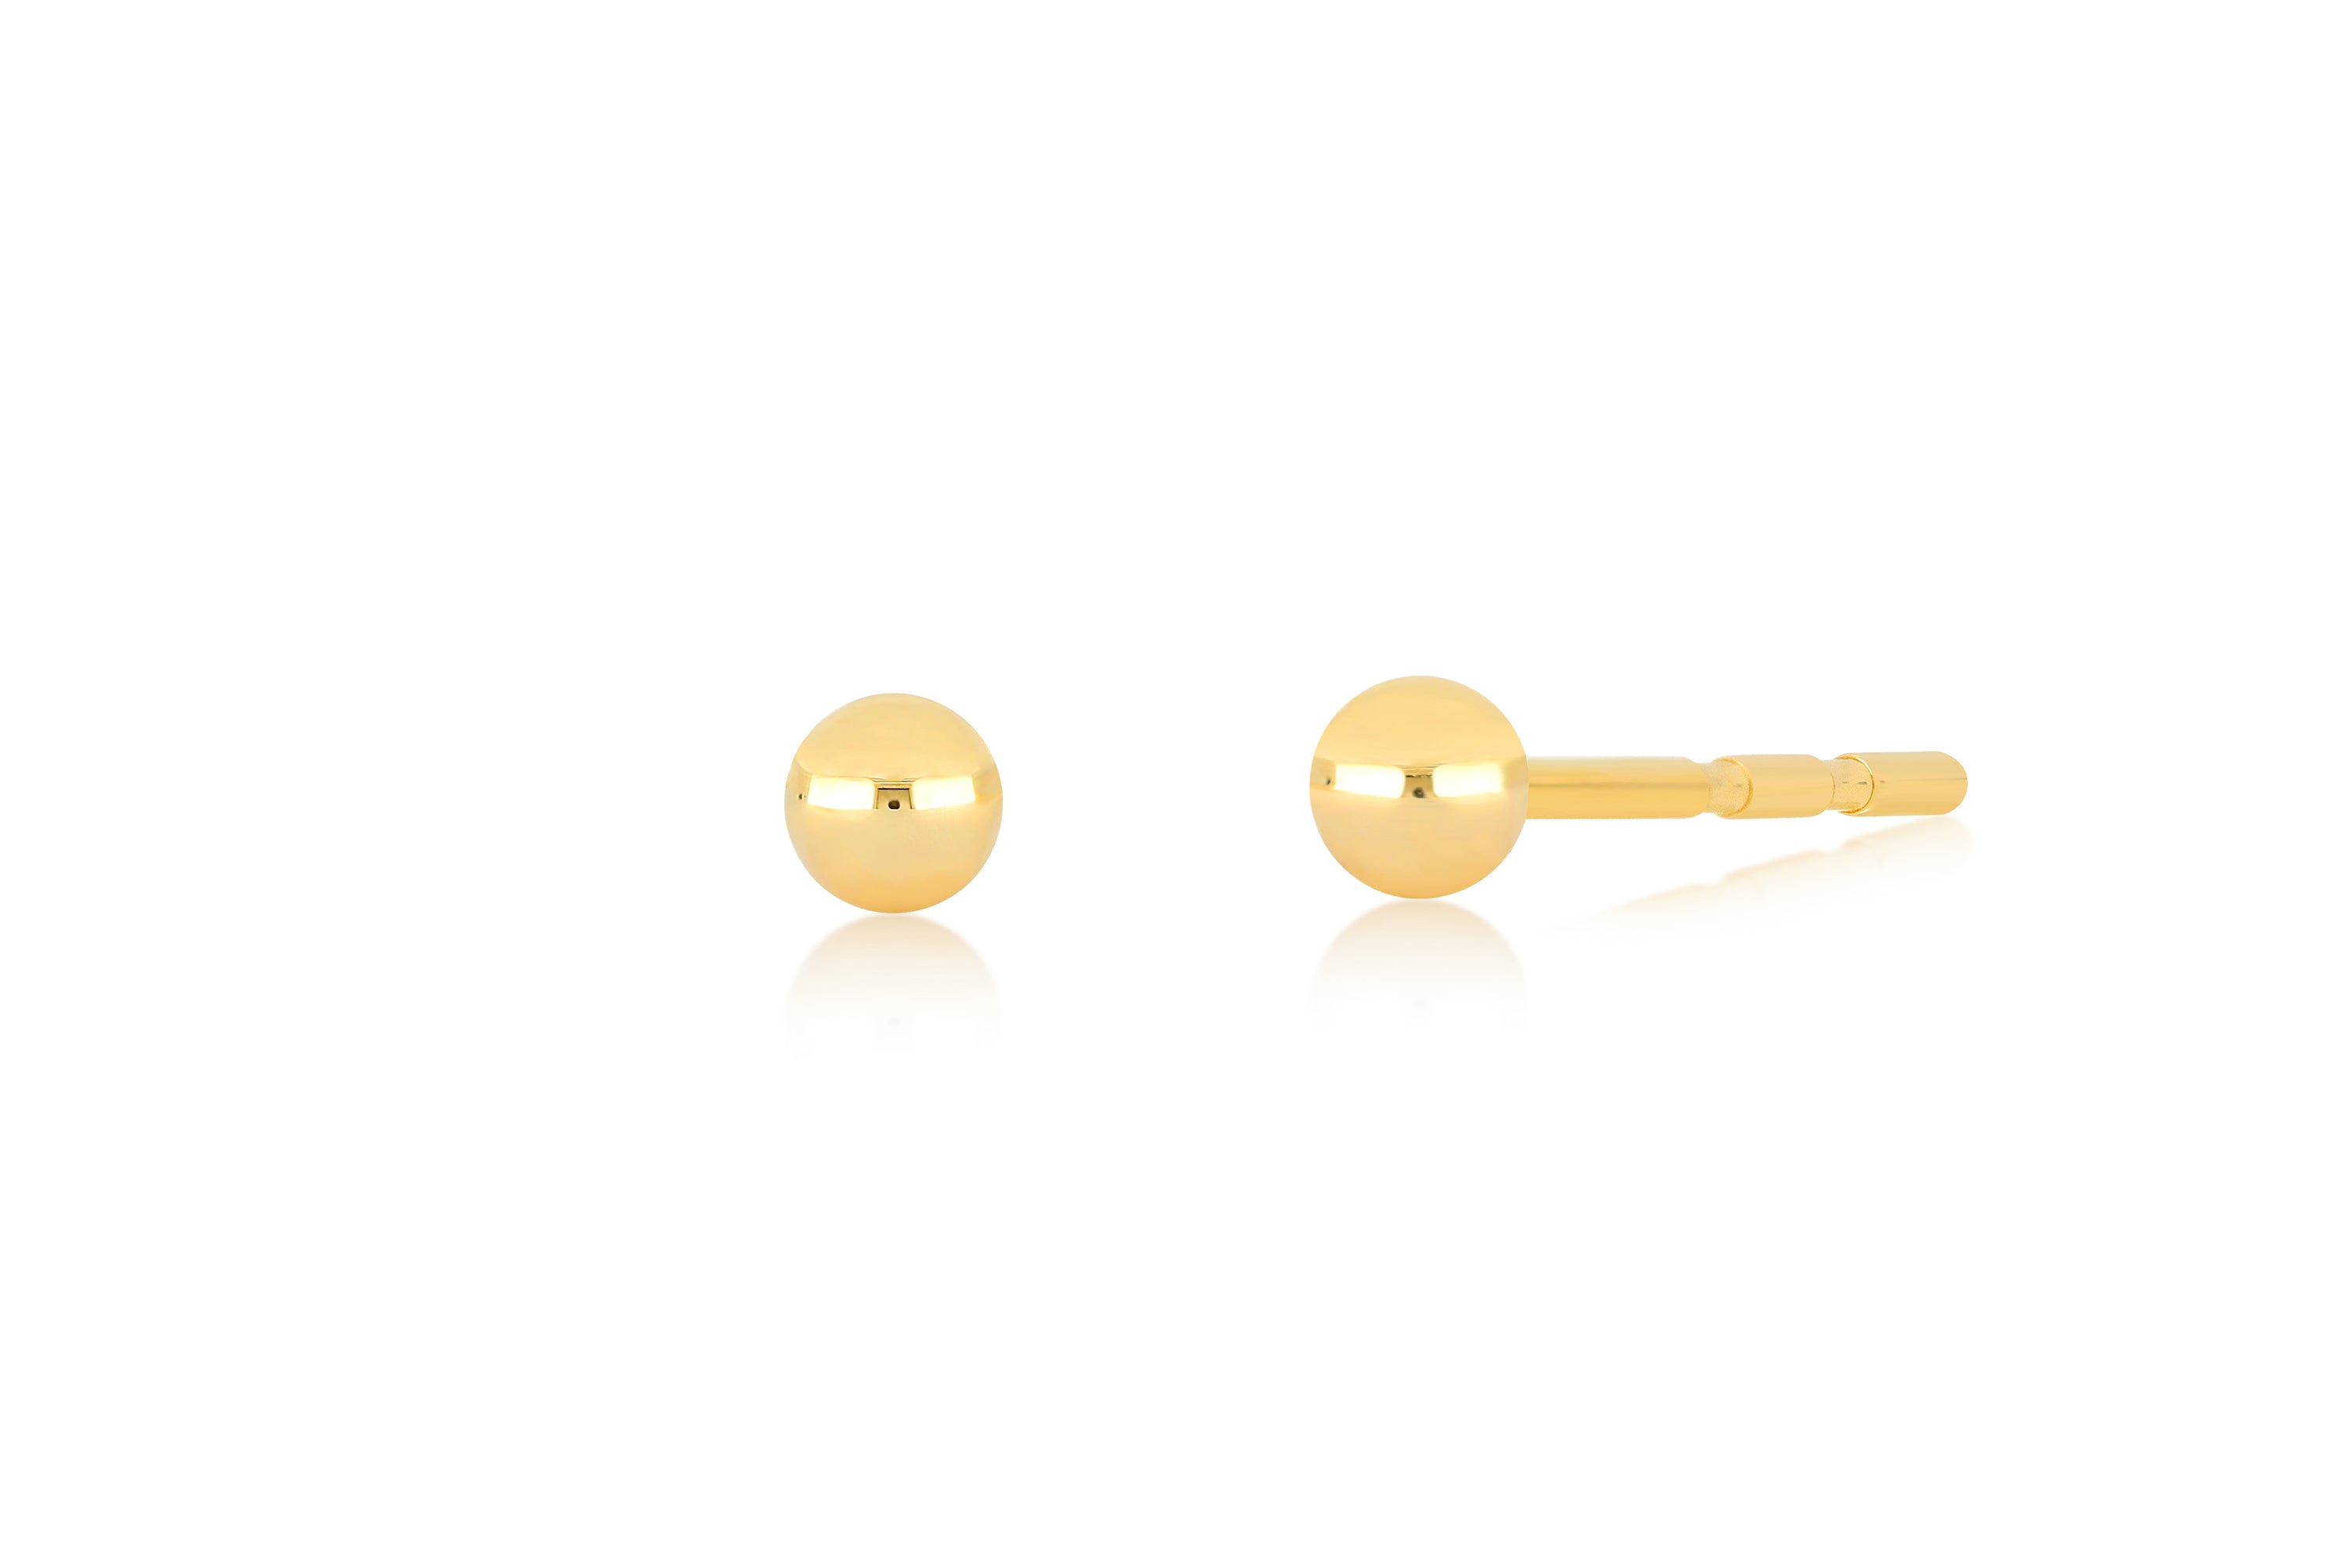 14k (karat) yellow gold ball stud earring measuring 3mm in height and width